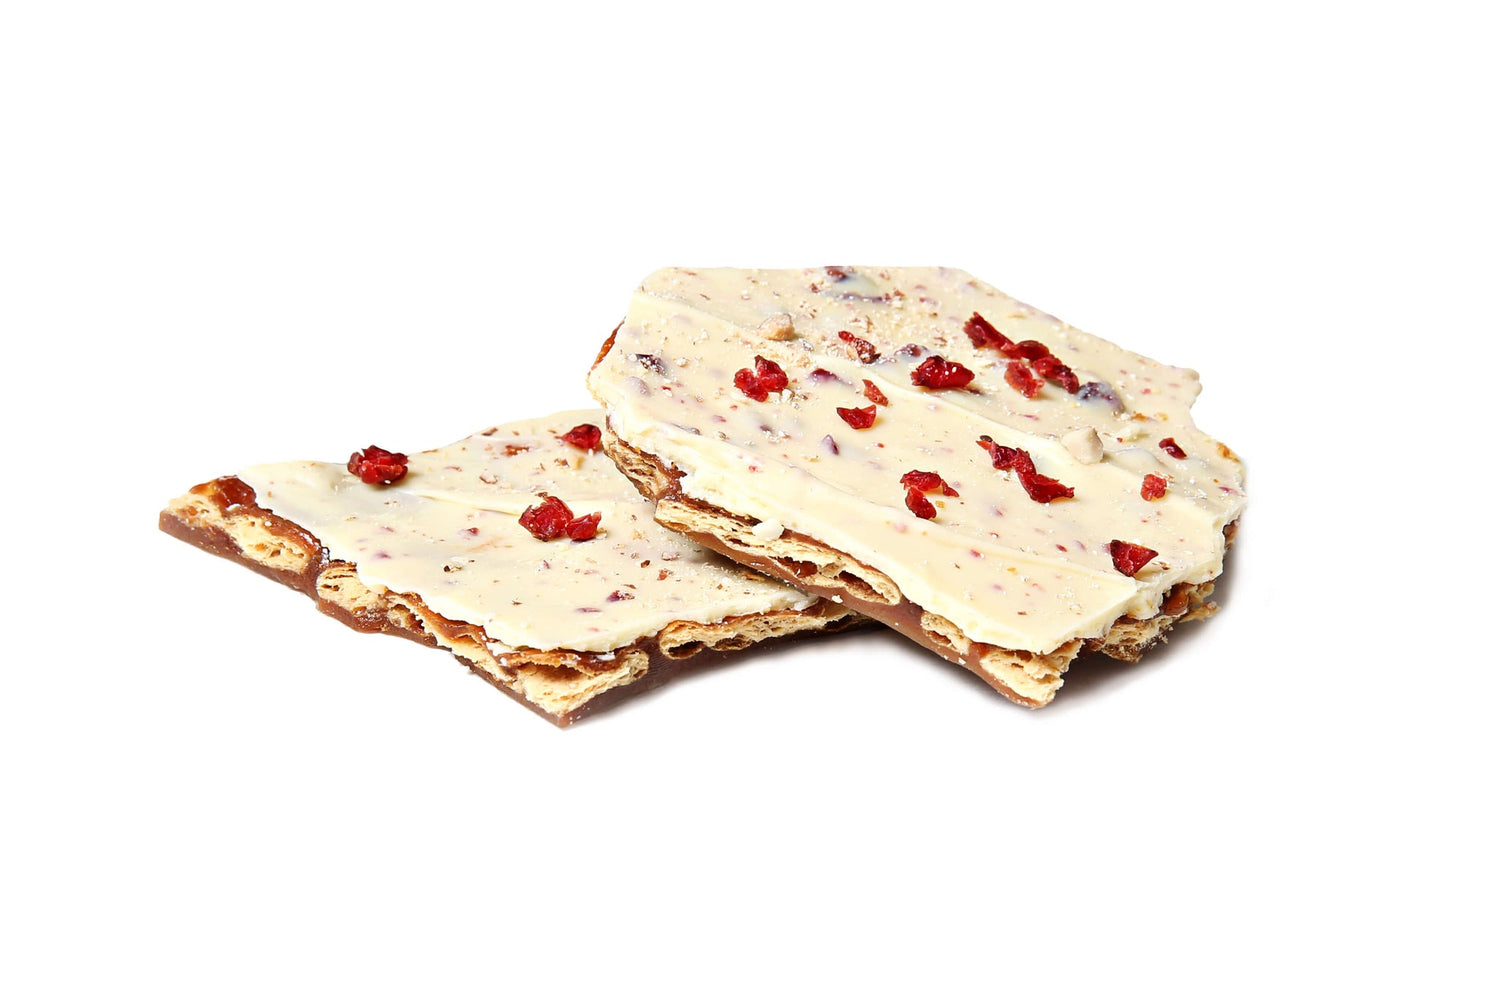 Christy's Gourmet - Cranberry Chocolate Toffee Crunch 180g